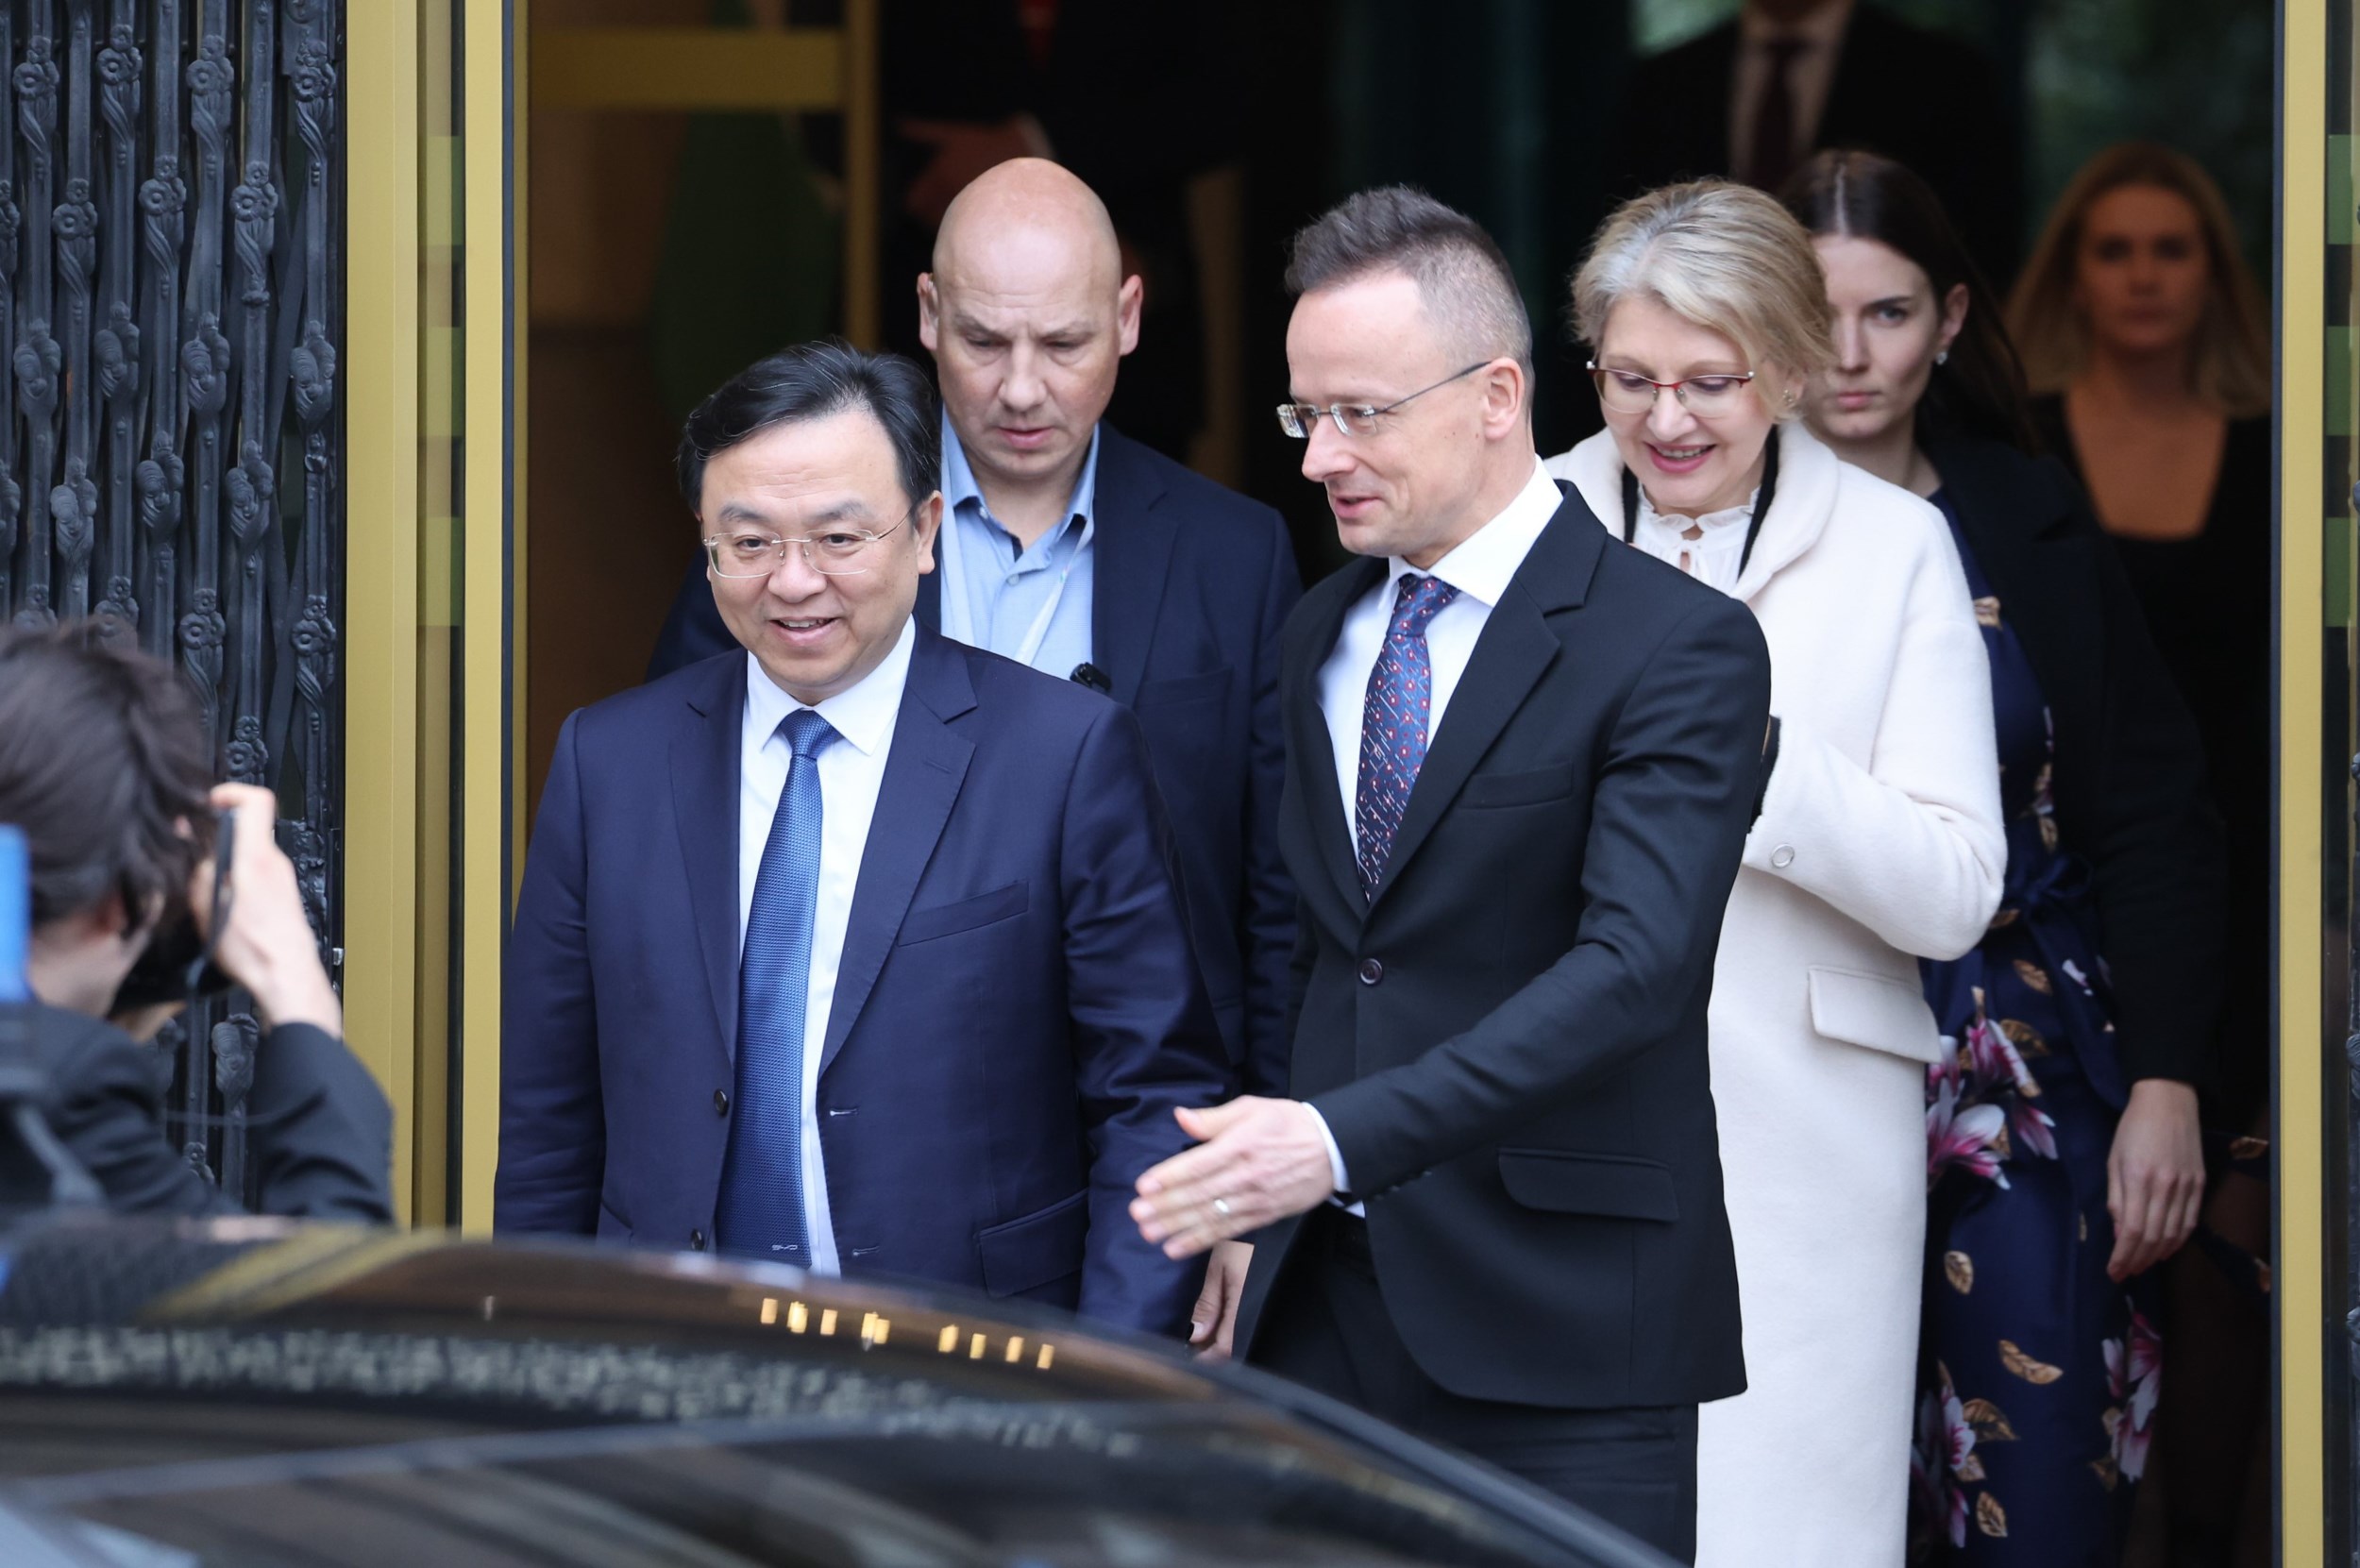 Economy: We met Szijjártó as he left the Foreign Ministry with the BYD leader, Butka was also present